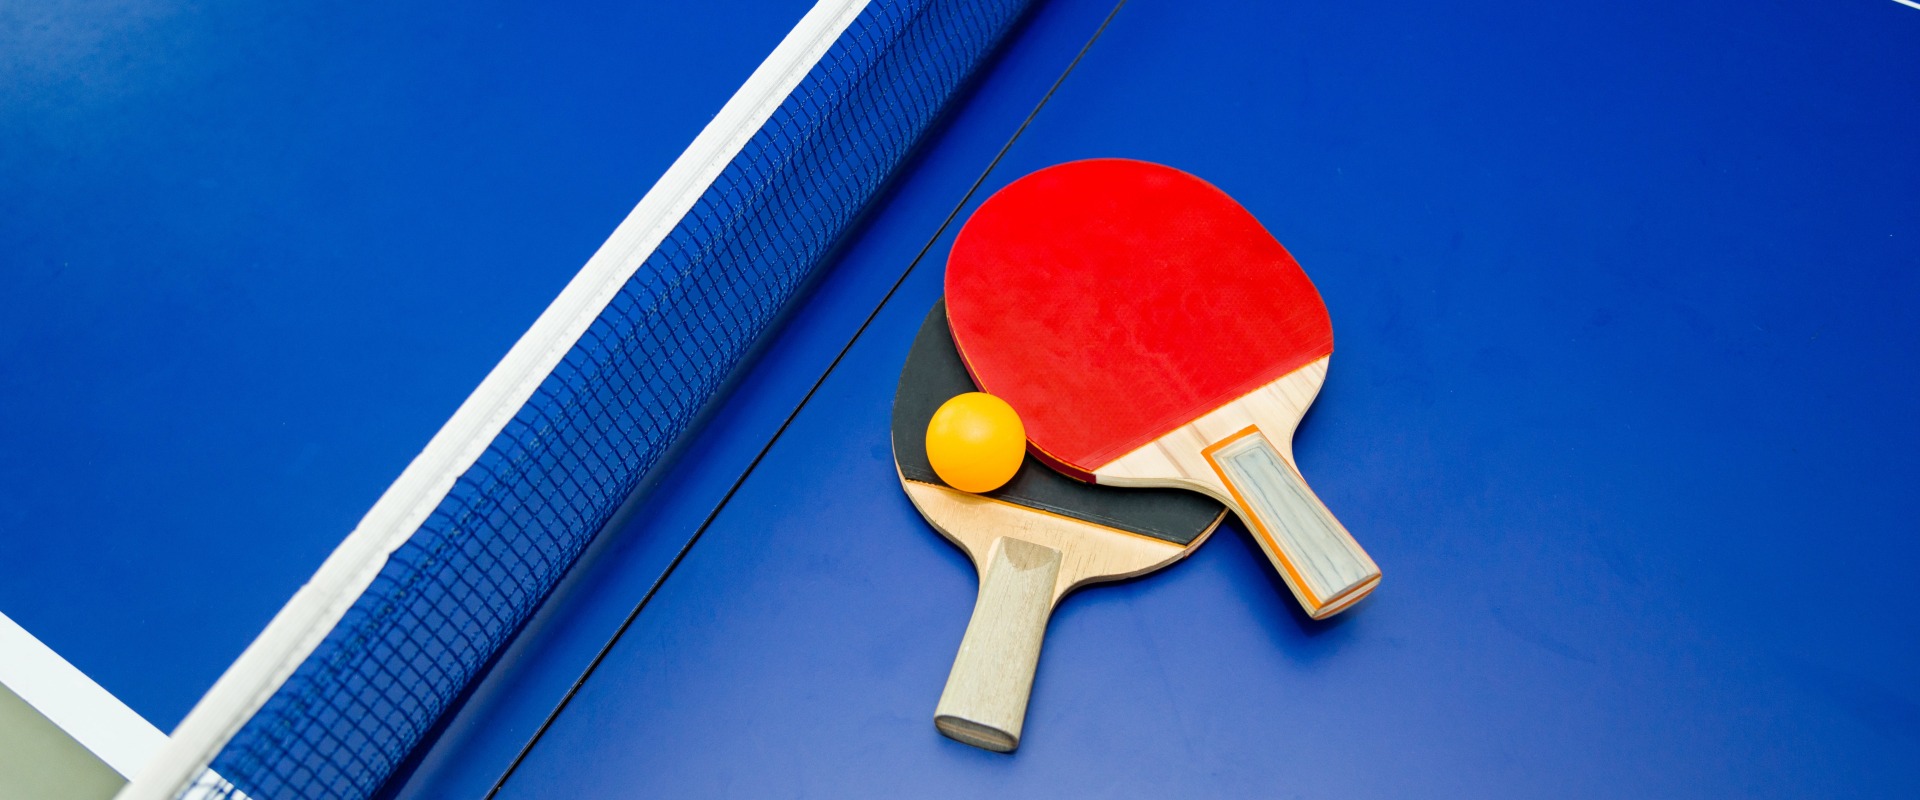 What is the Official Name of the Sport Commonly Known as Table Tennis?